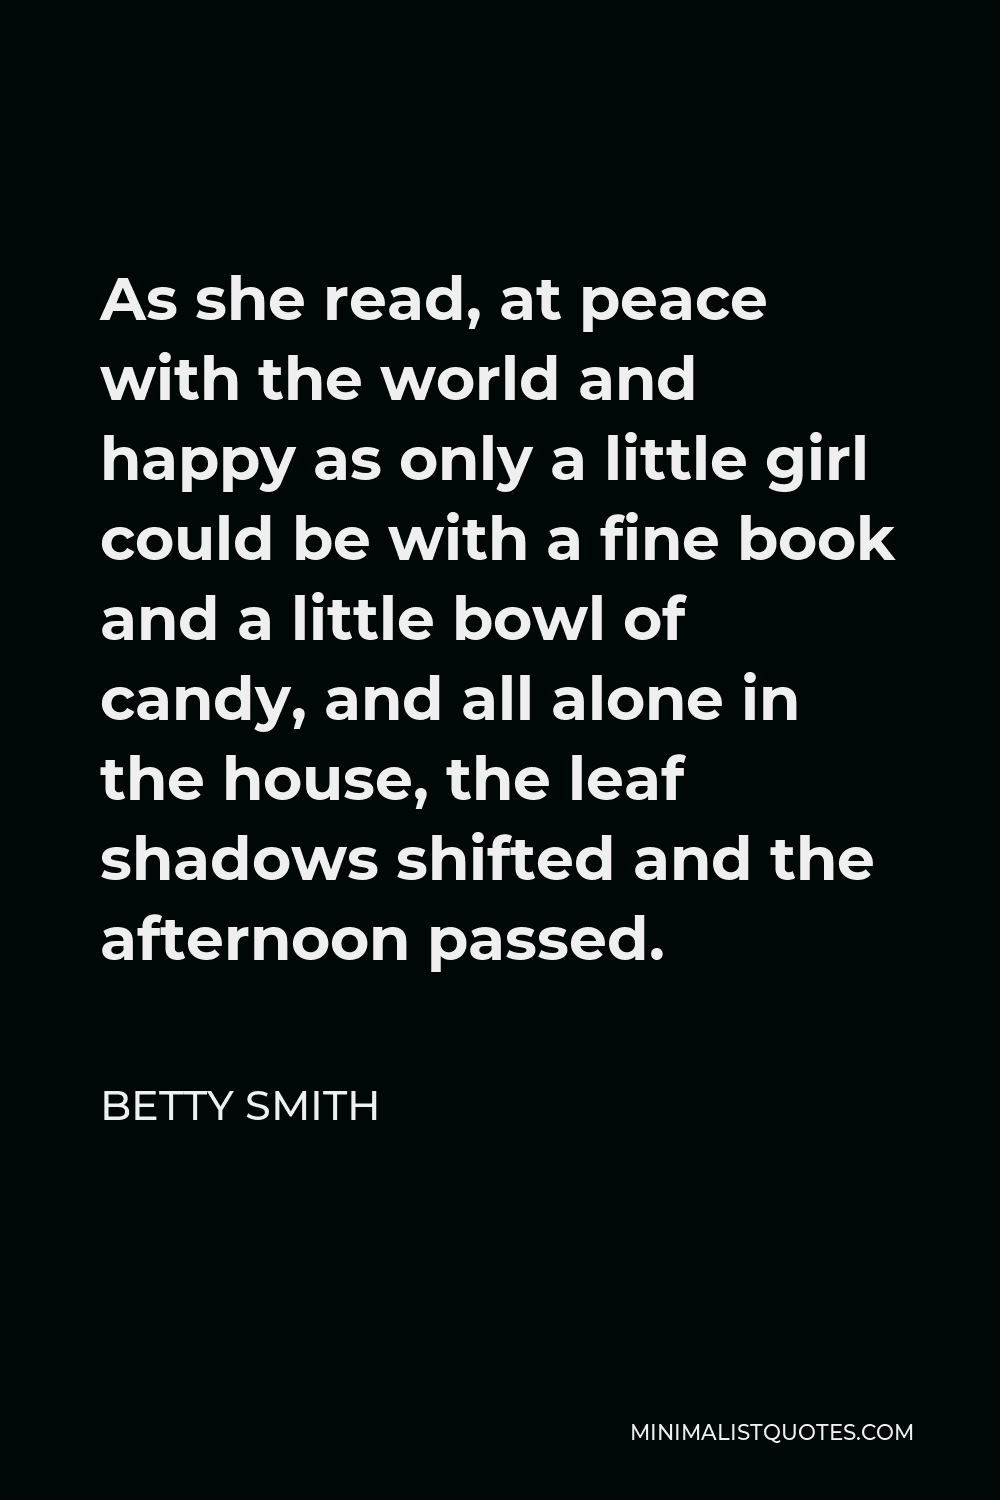 Betty Smith Quote - As she read, at peace with the world and happy as only a little girl could be with a fine book and a little bowl of candy, and all alone in the house, the leaf shadows shifted and the afternoon passed.